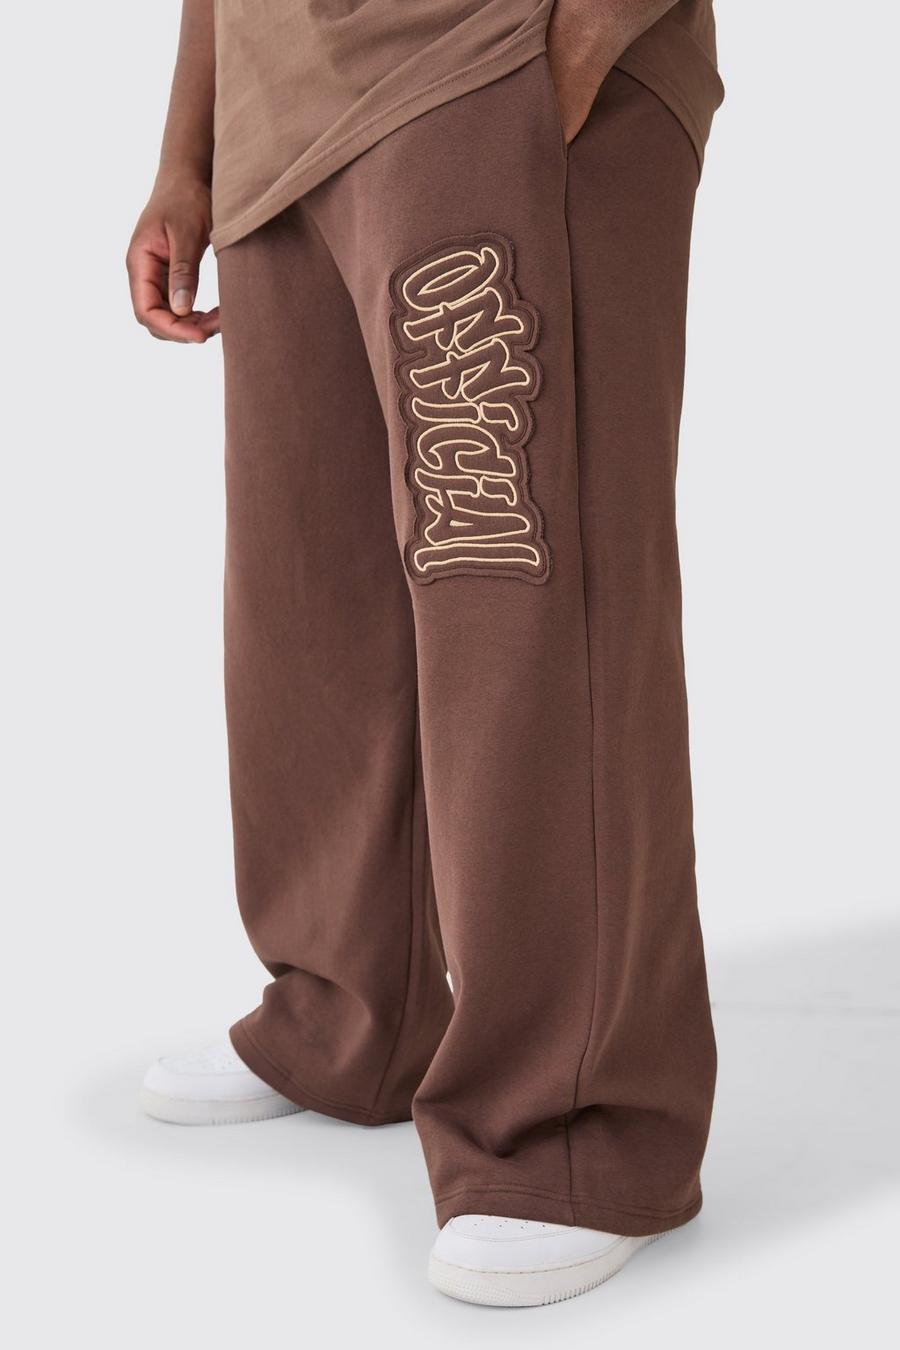 Aries pants ( AVAILABLE PLUS SIZE )